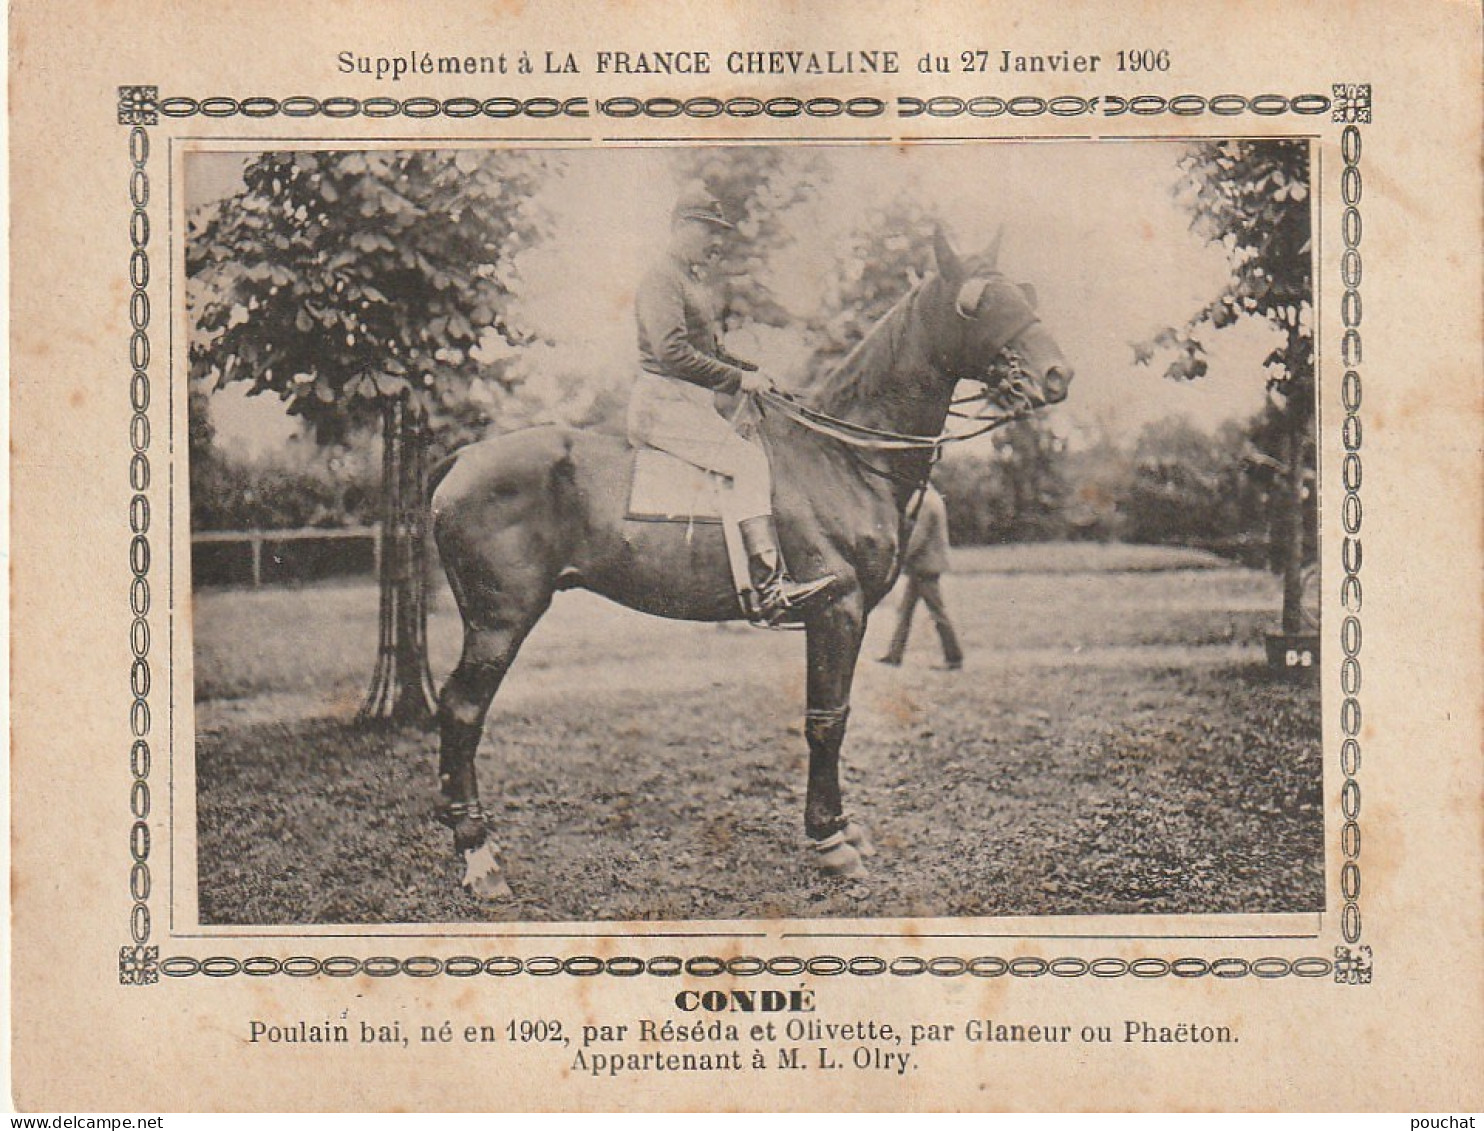 AA+ - " CONDE " - JUMENT BAIE  APPARTENANT A M. L. OLRY - SUPPL. FRANCE CHEVALINE JANVIER 1906 - Paardensport